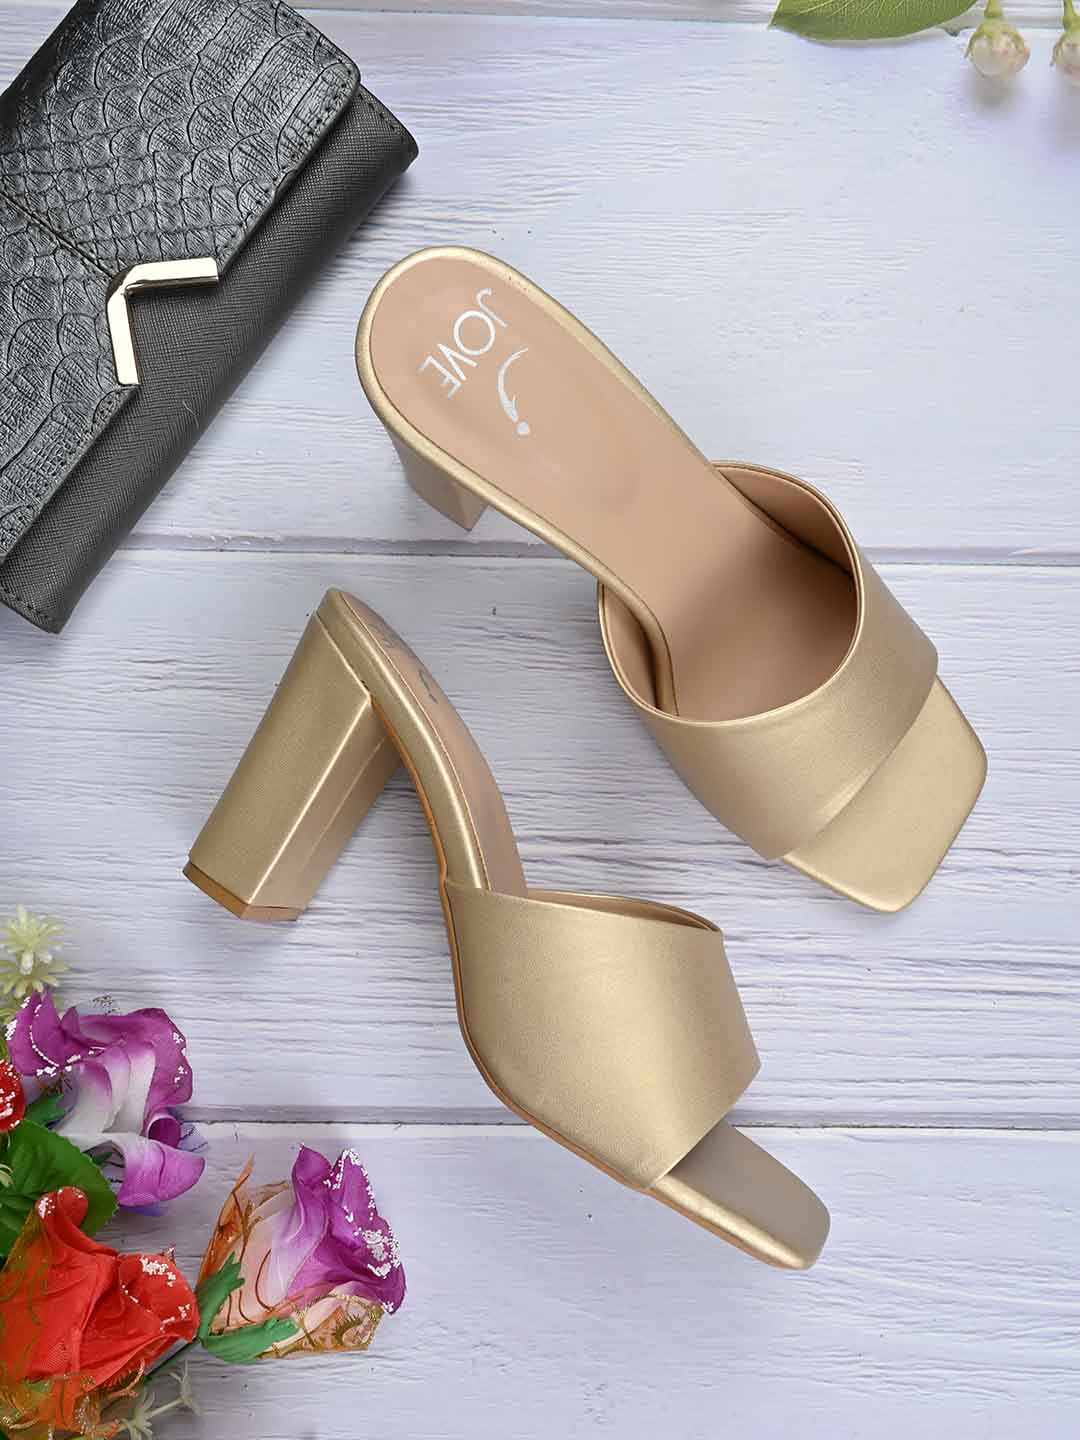 Shoes Shopping, Feet And Rich Woman New High Heels In Store, Elegant Or  Comfort. Retail Fashion Bag, Sale And Fashion Employee Feet With Luxury  Designer Footwear, Customer Or Wealth With Style Choice